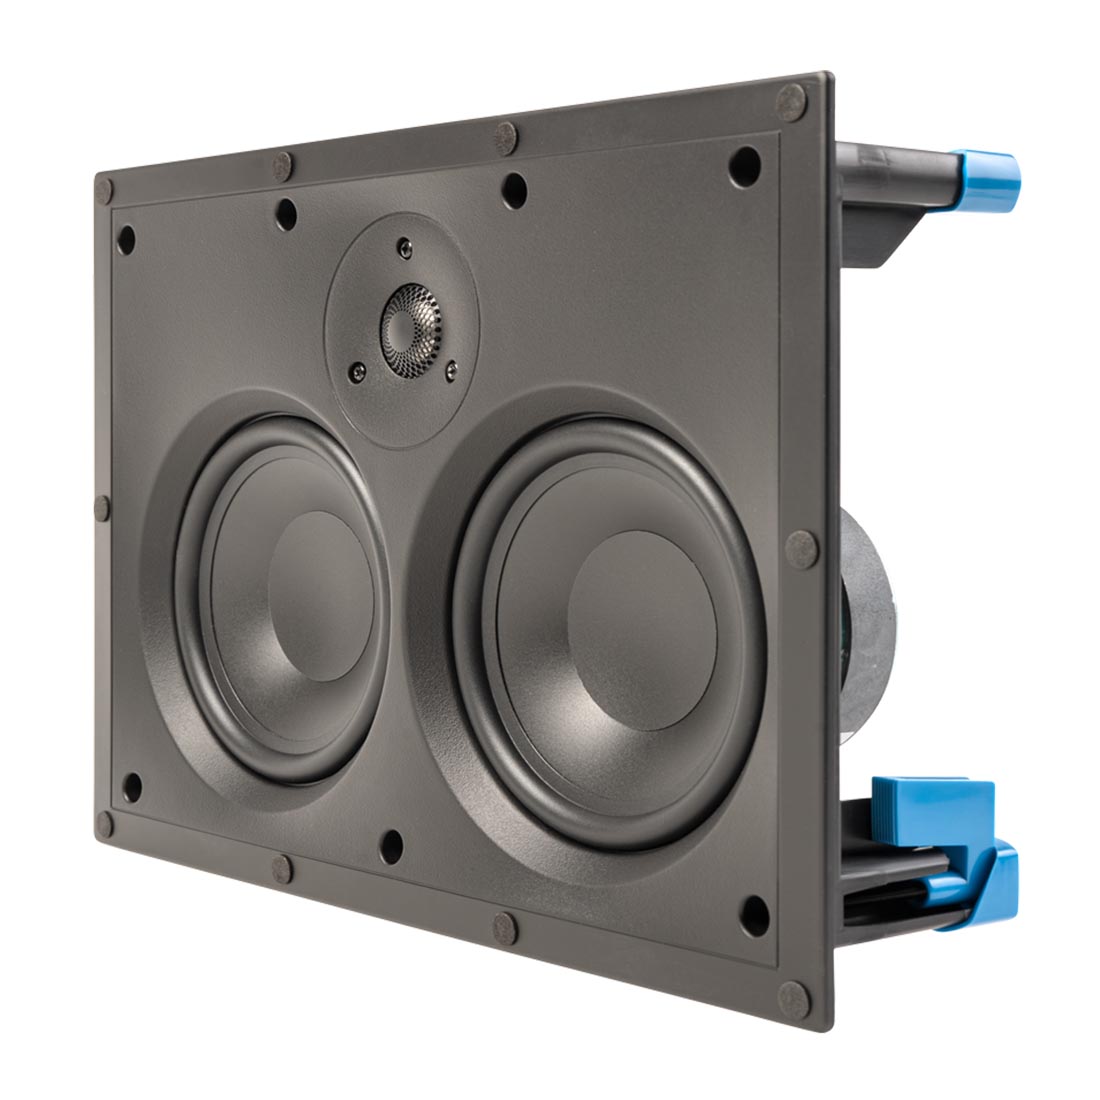 Paradigm CI Home H55-LCR v2 5.25" In-Wall LCR Speaker - Each